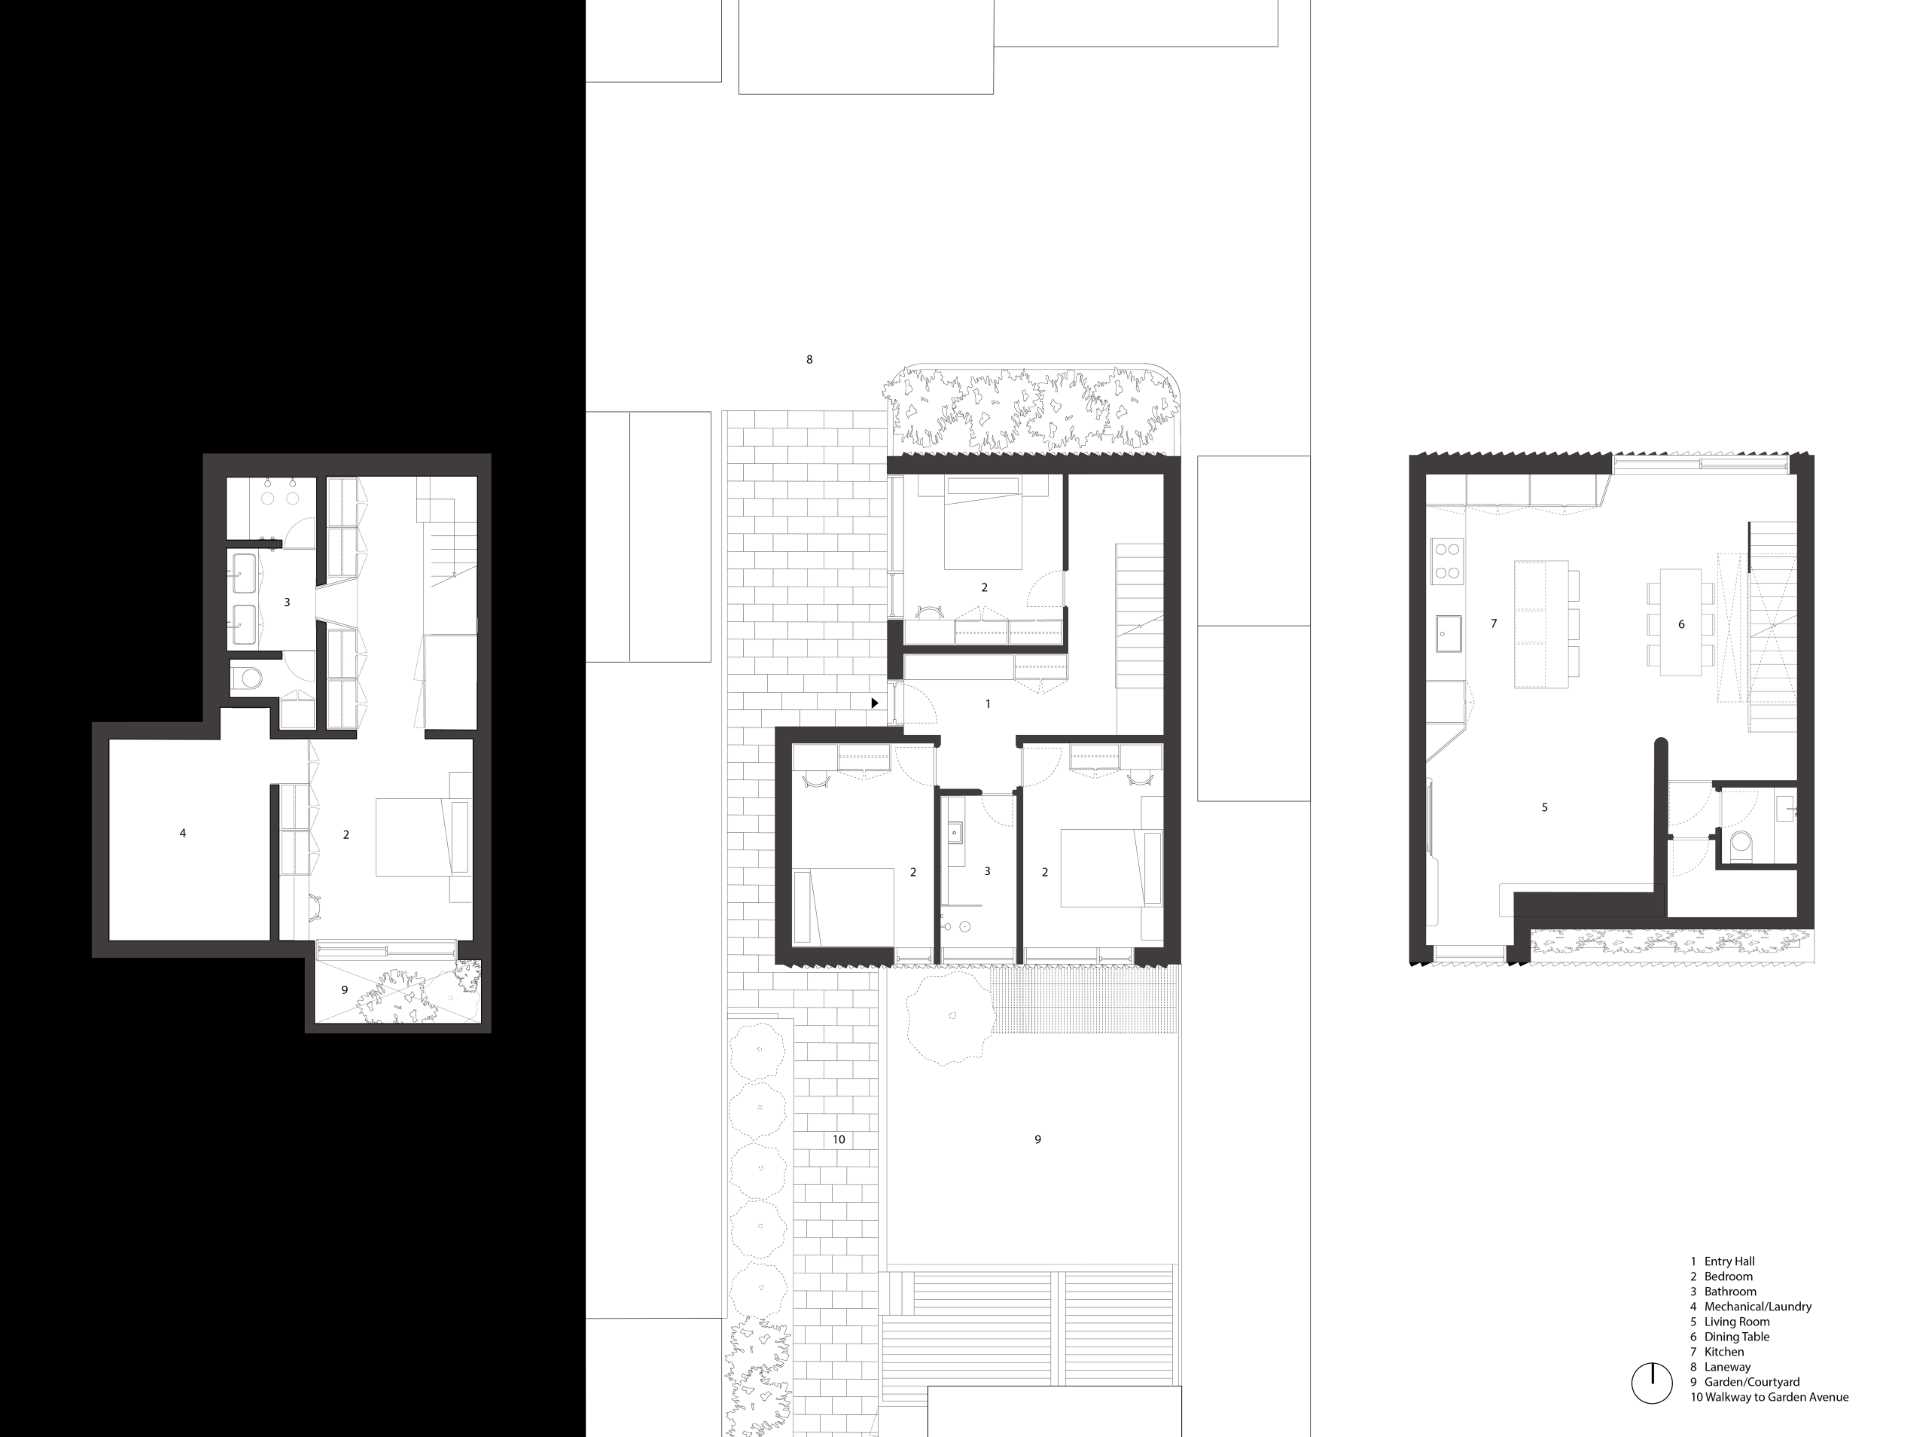 Architectural drawings for a modern laneway home.